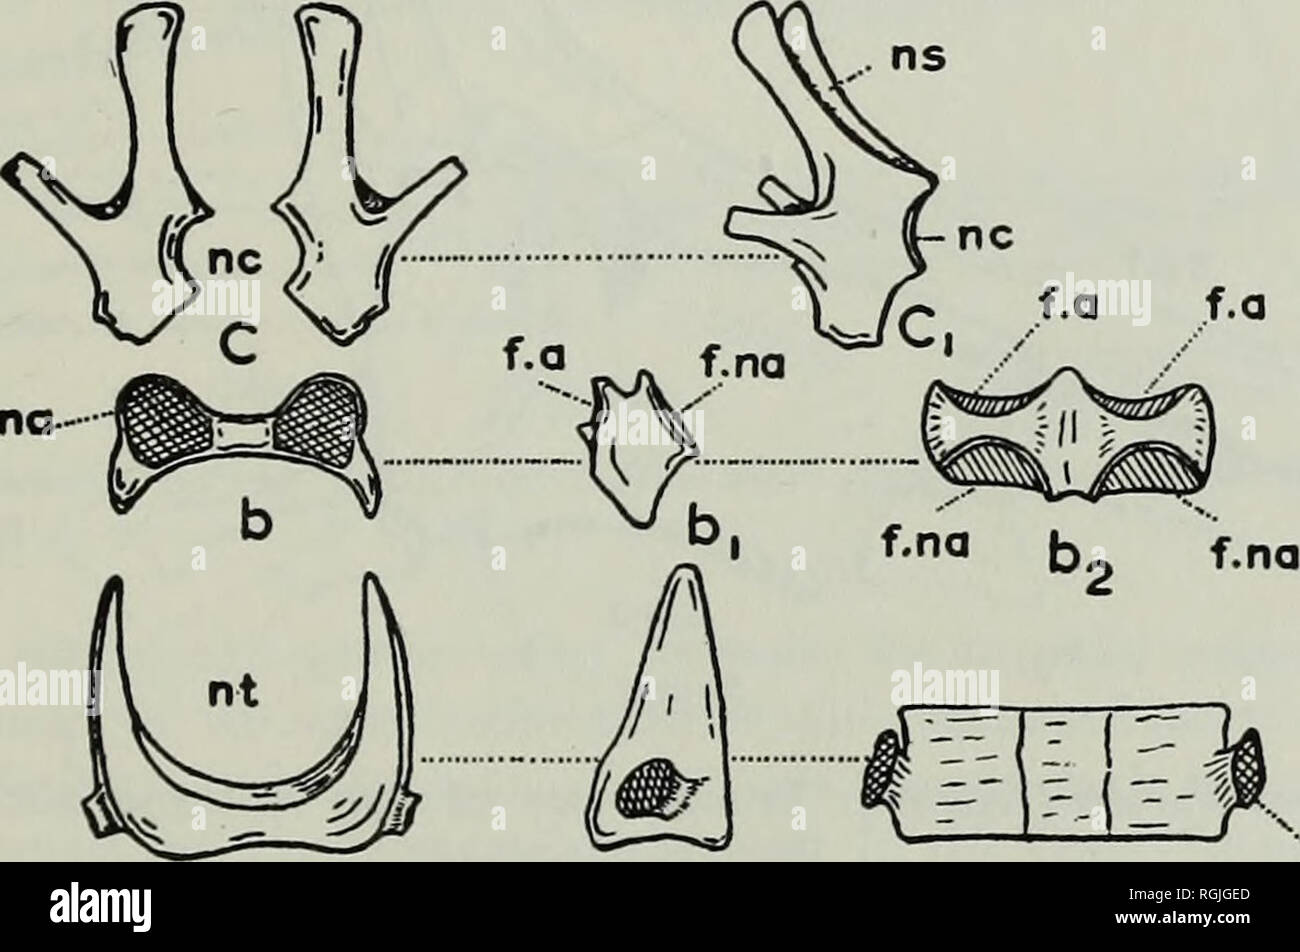 Bulletin of the British Museum (Natural History), Geology. f.a 10 mm Fig.  32. Caturus chirotes (Agassiz). Ceratohyal and hypohyal of the left side.  From G.S. 601246.. f.na Fig. 33. Caturus chirotes (